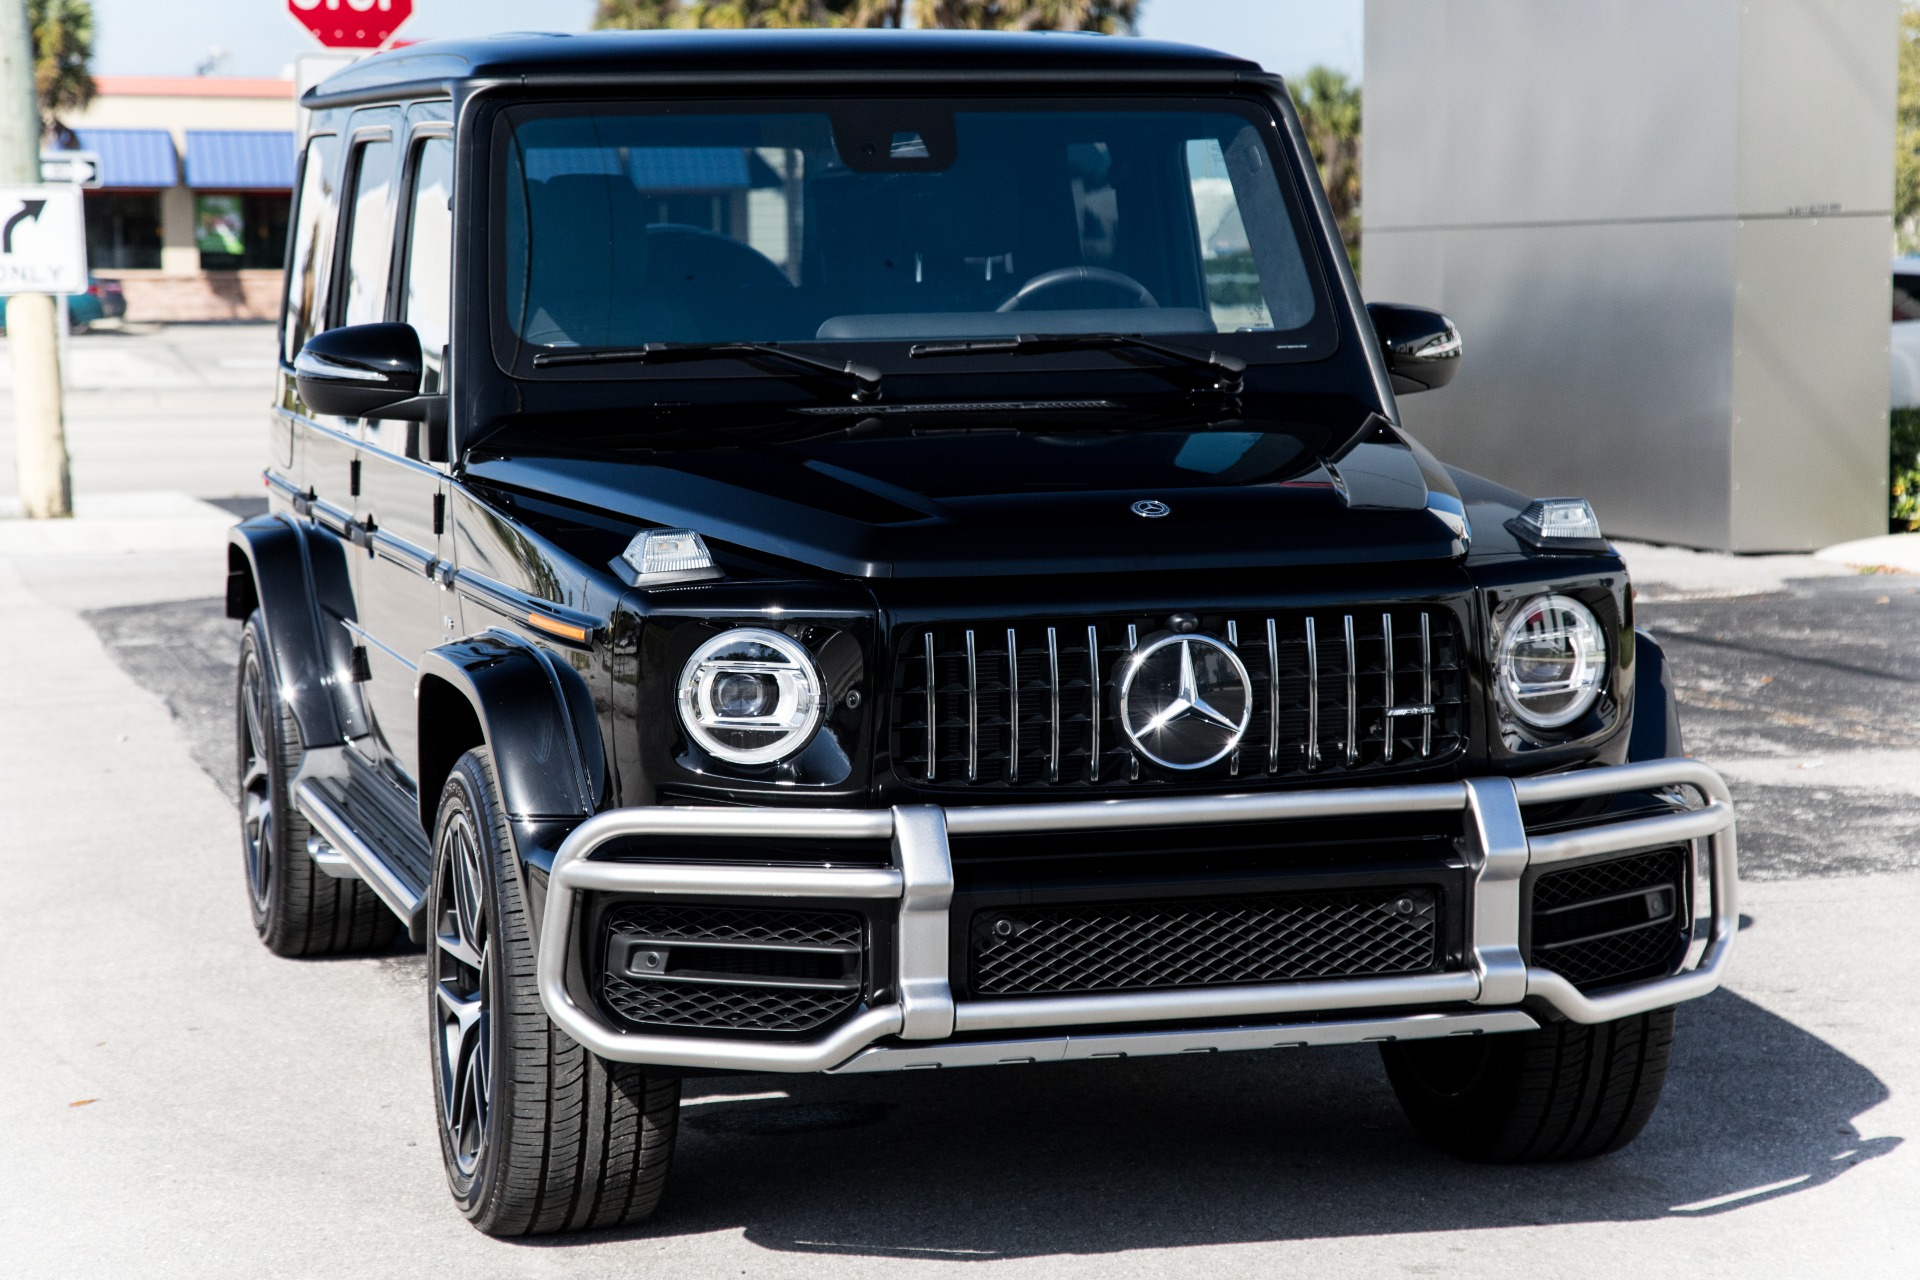 Used 2019 Mercedes Benz G Class AMG G 63 For Sale 179 900 Marino 